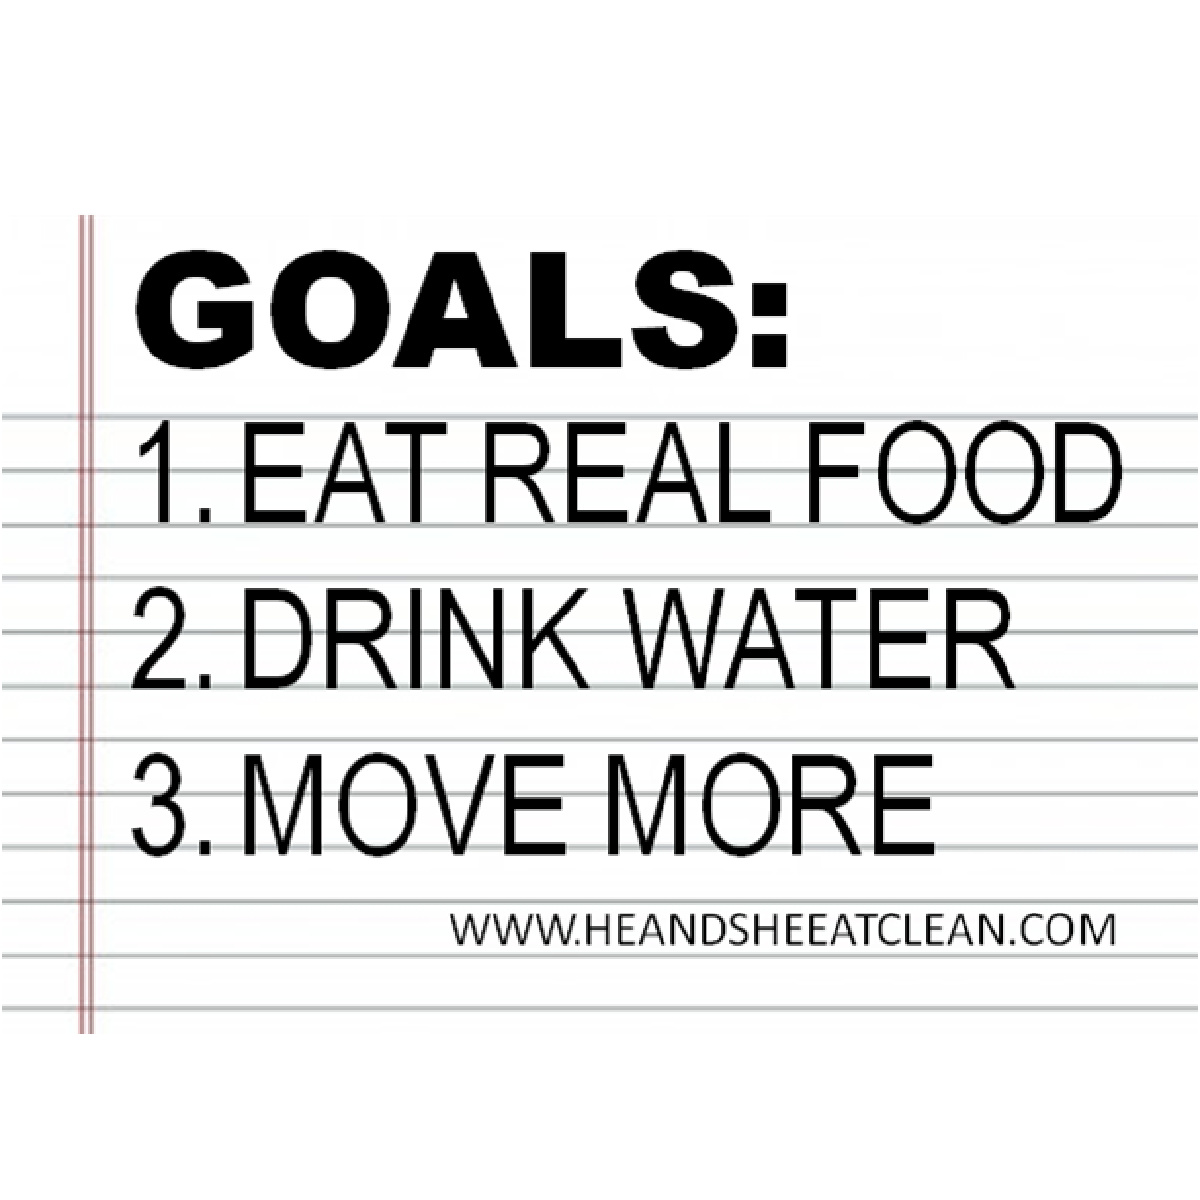 text reads goals: 1. eat real food, 2. drink water, 3. move more